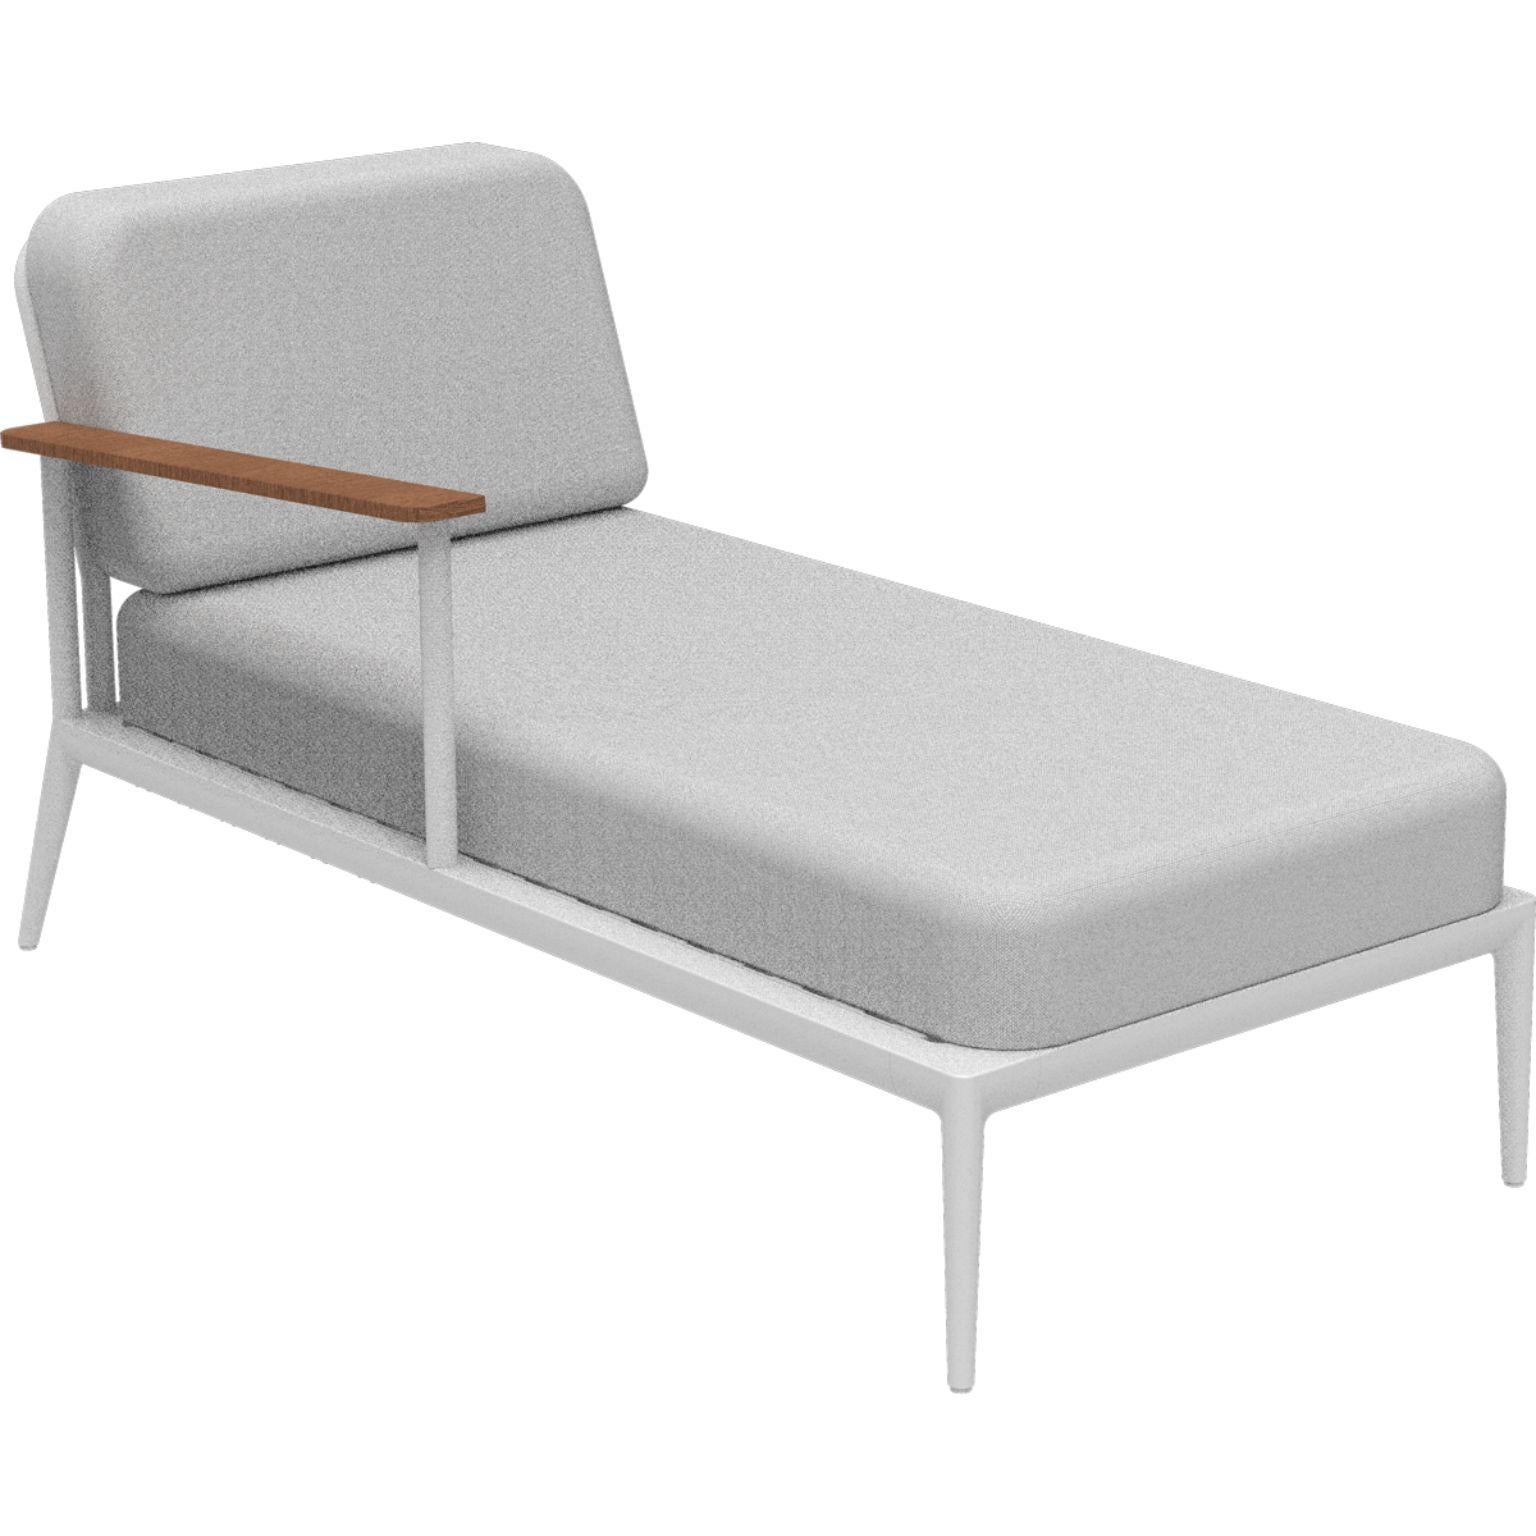 Nature White Right chaise lounge by MOWEE
Dimensions: D155 x W76 x H81 cm (seat height 42 cm).
Material: Aluminum, upholstery and Iroko Wood.
Weight: 28 kg.
Also available in different colors and finishes. 

An unmistakable collection for its